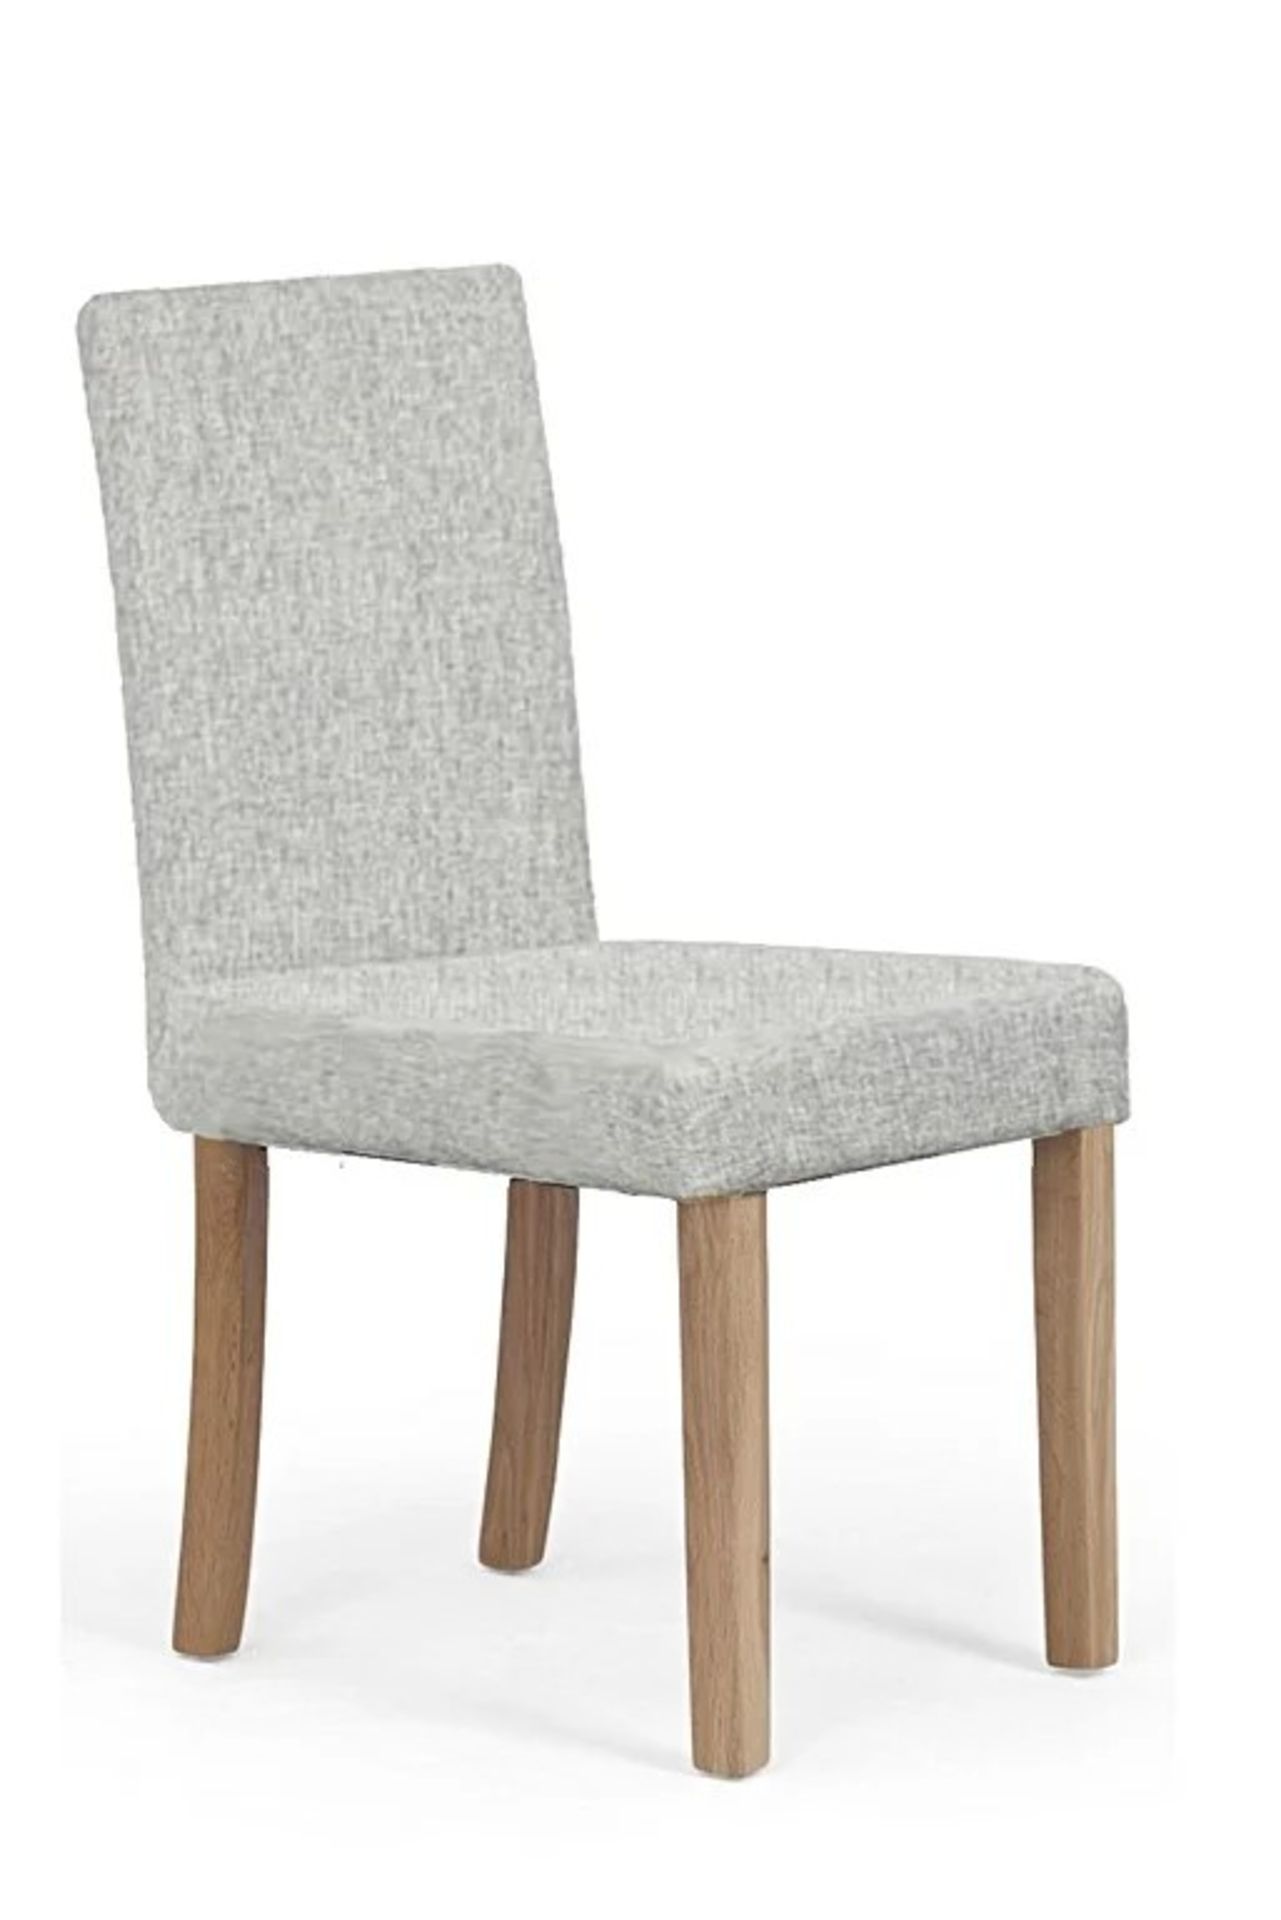 A set of 2 x Mia Fabric Green Dining Chair Stylish and simple, the Mia offers a comfy and